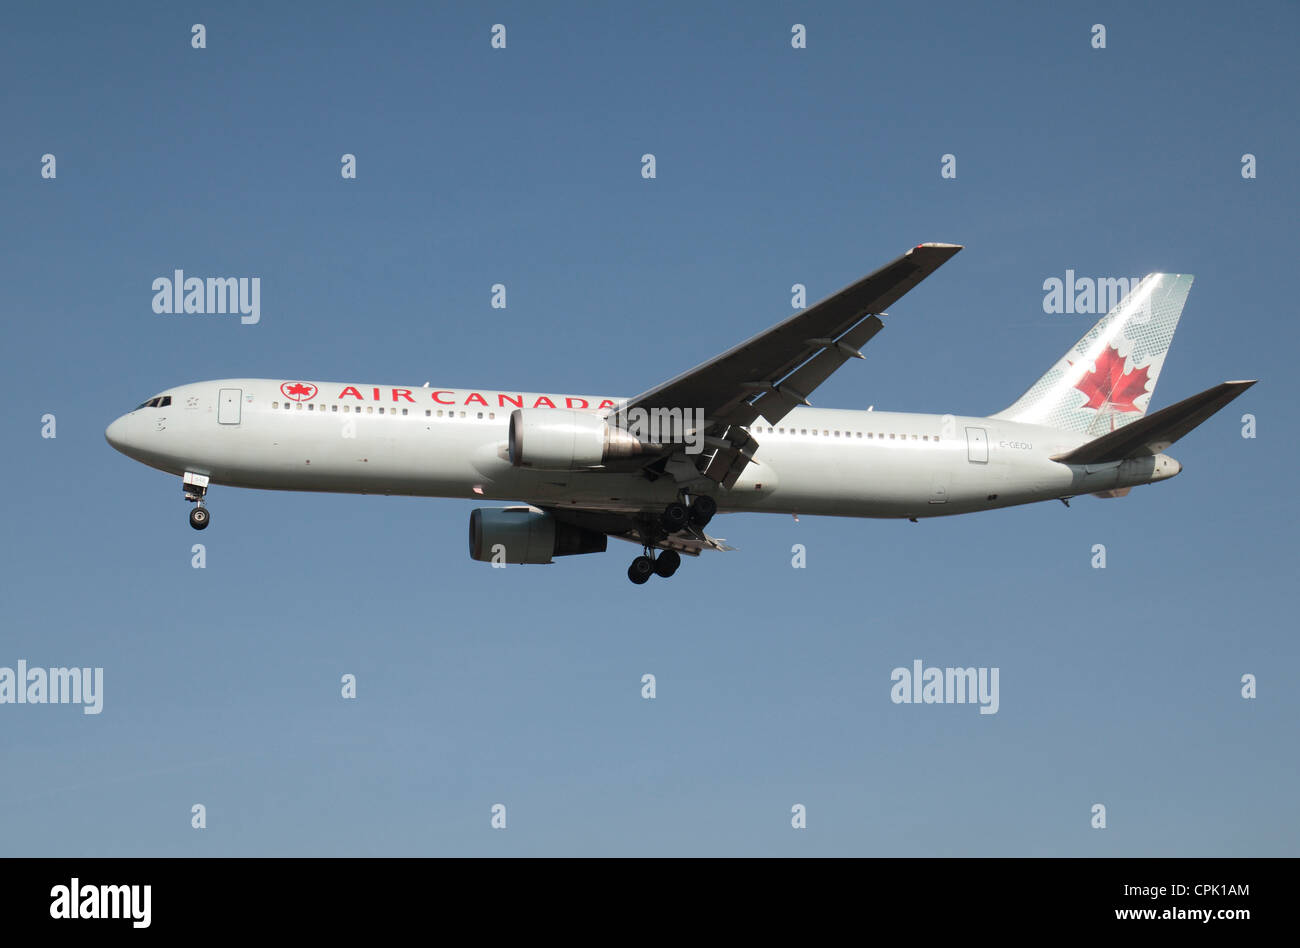 The Air Canada Boeing 767-375/ER (C-GEOU) about to land at Heathrow Airport, London, UK. Feb 2012 Stock Photo